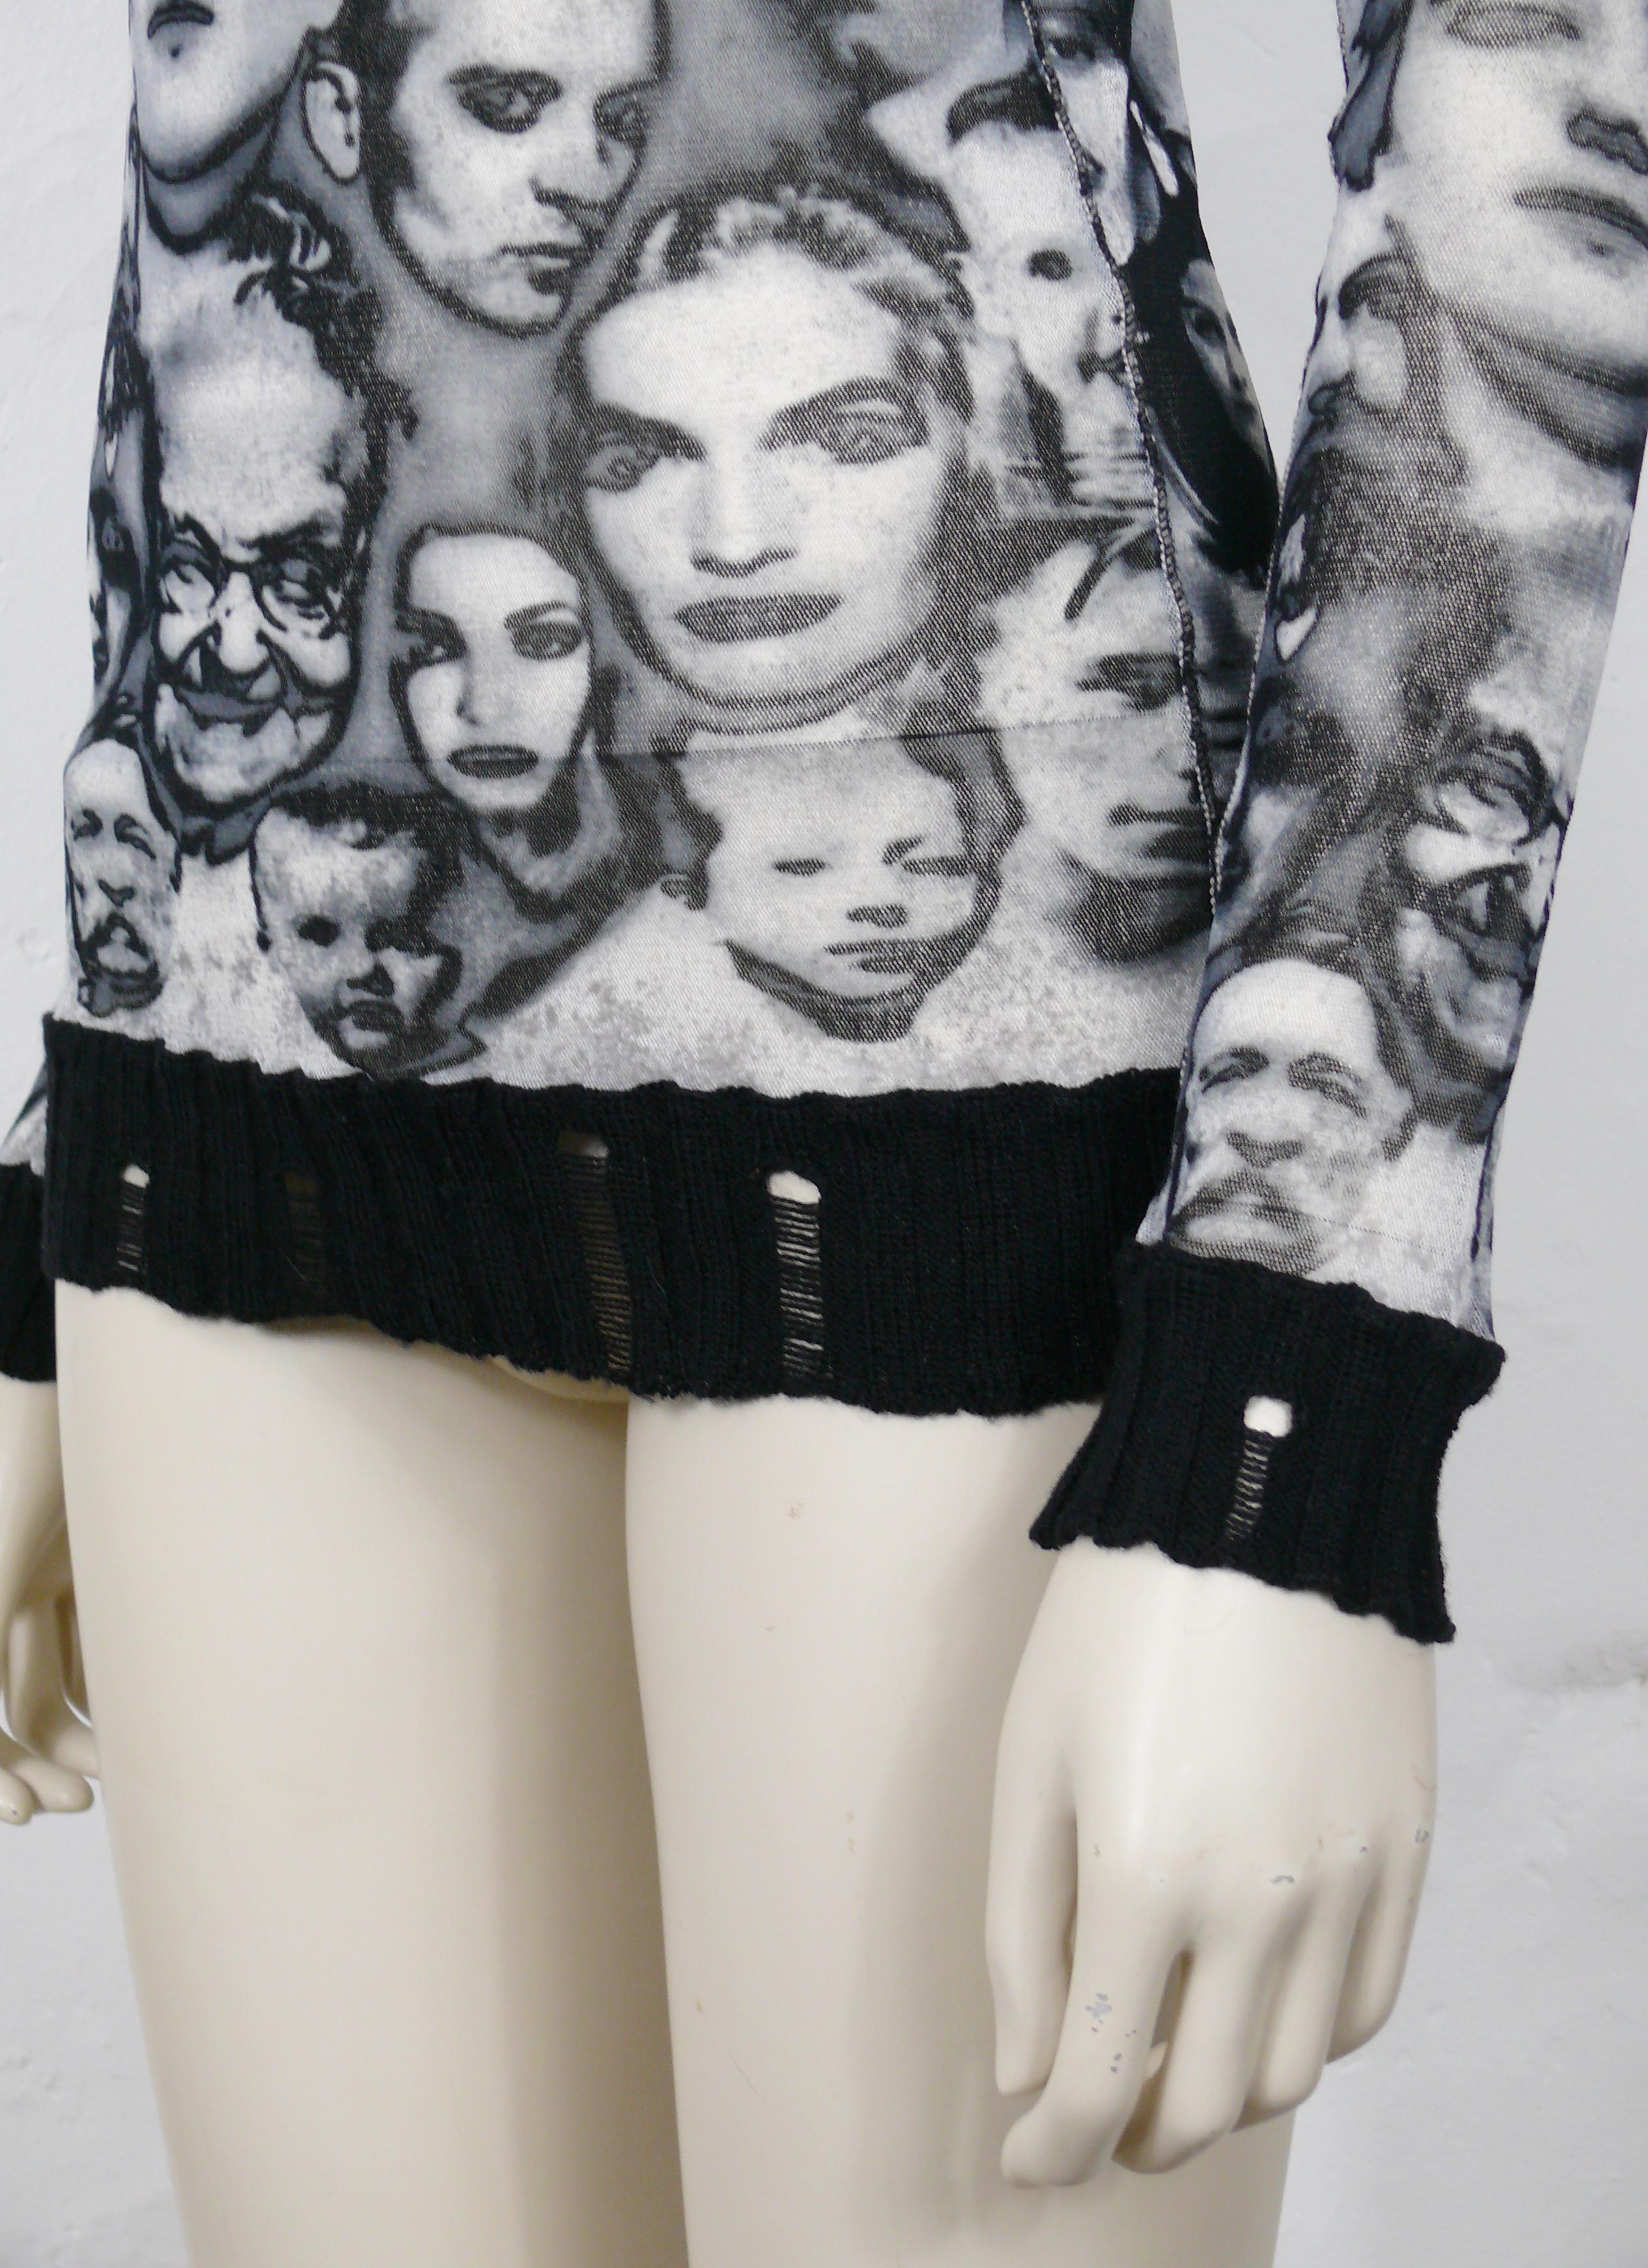 Jean Paul Gaultier Maille Vintage Iconic Faces Print Mesh Hooded Top Size S For Sale 1